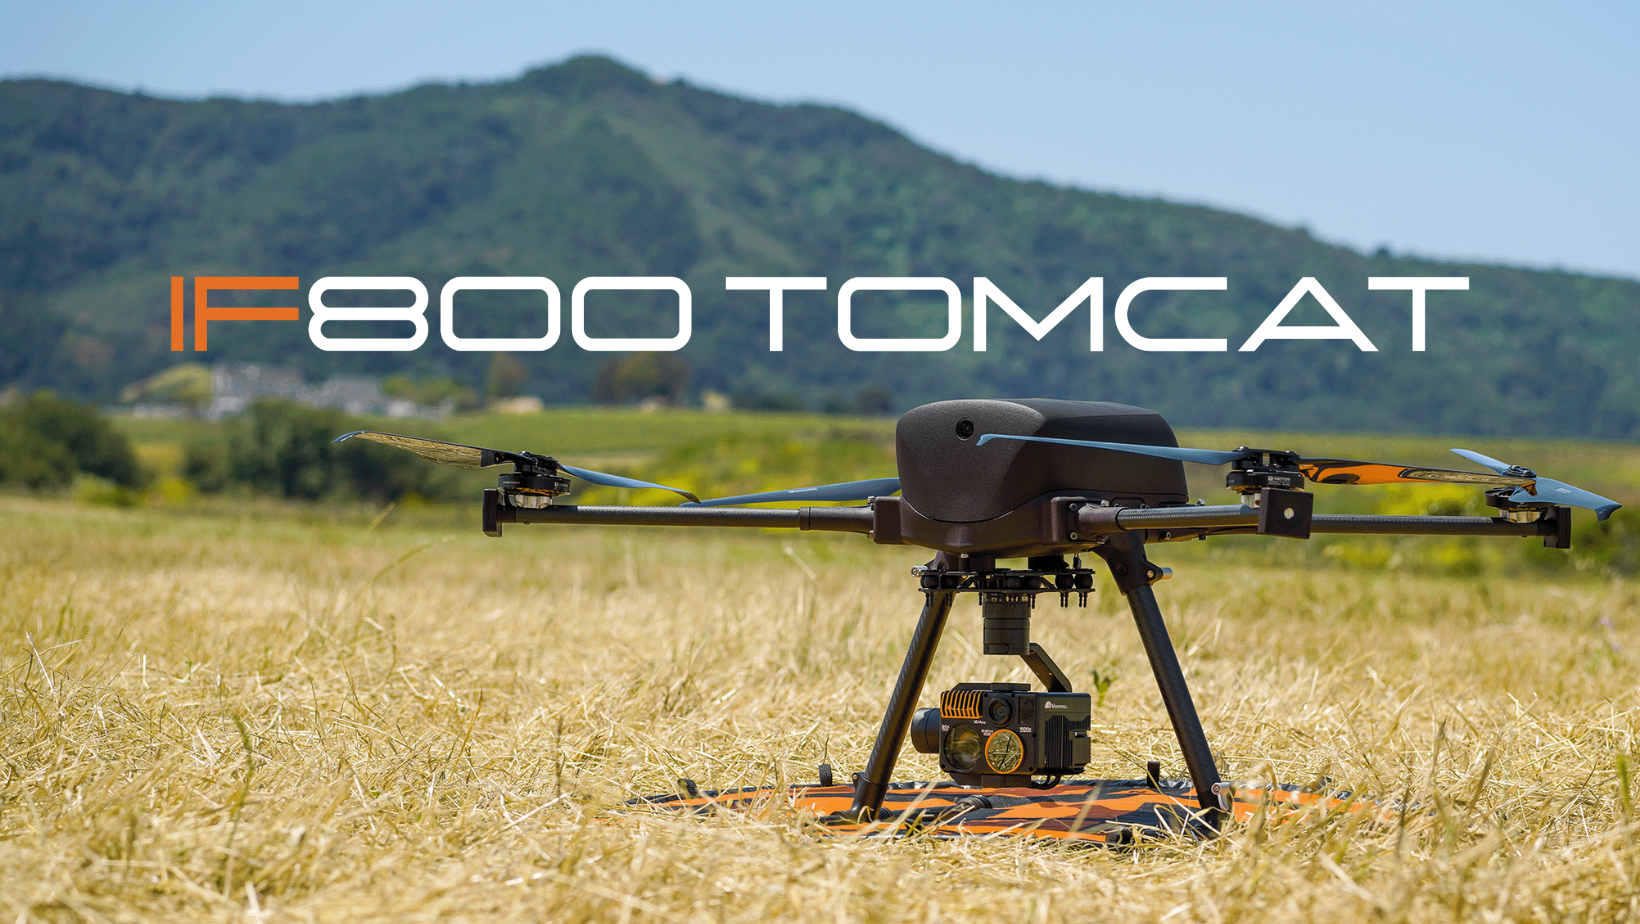 IF800 tomcat industrial drone